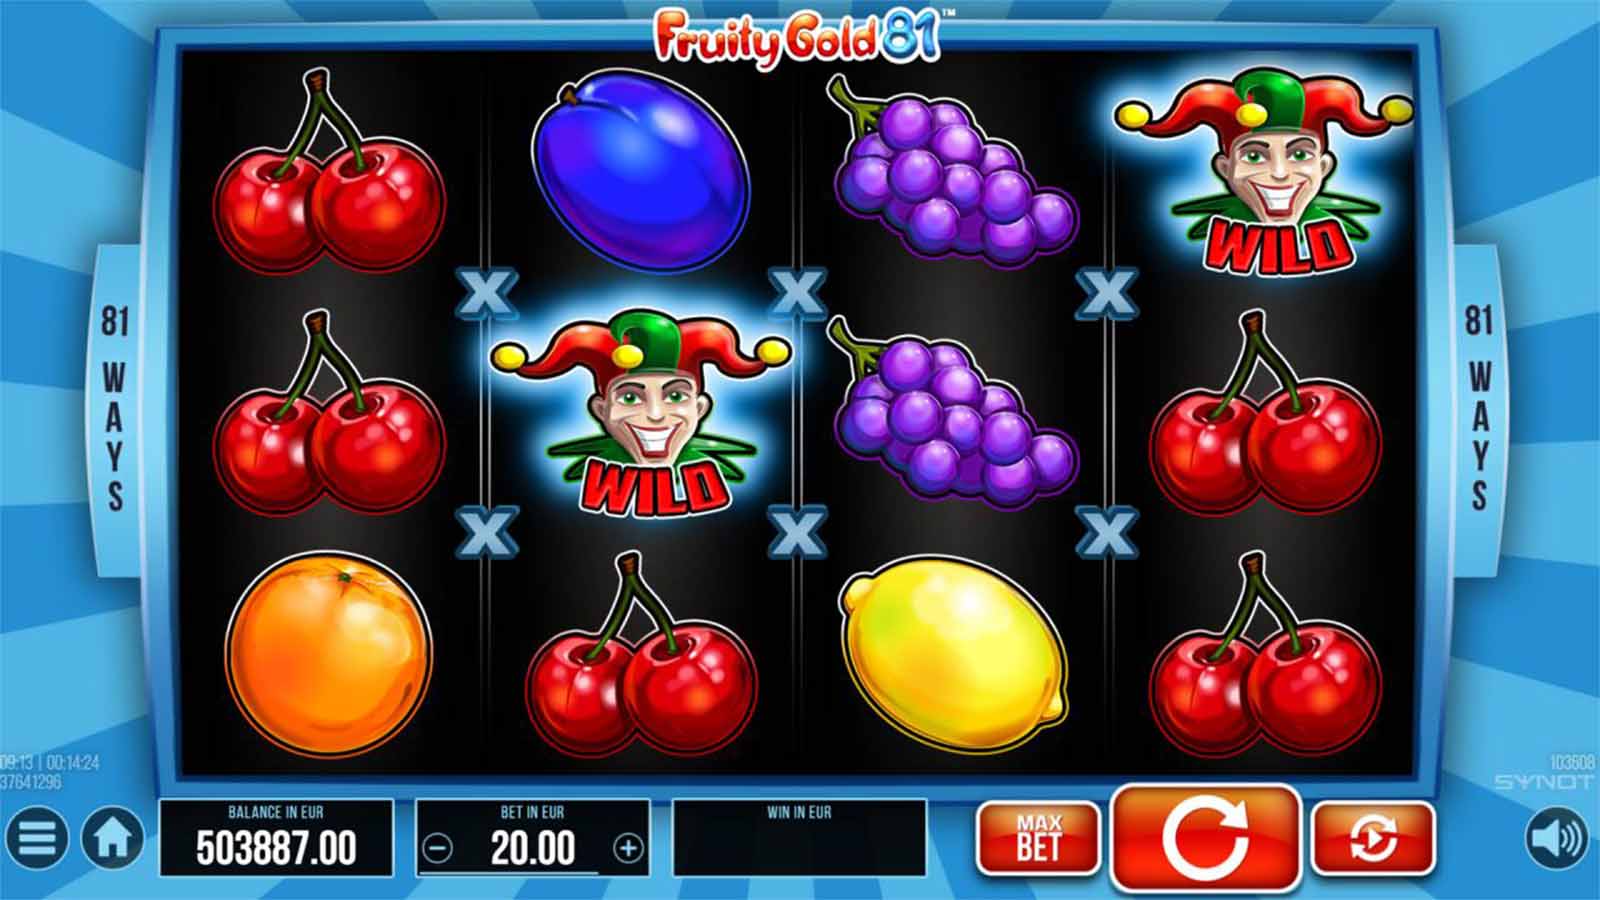 Fruity Slot 81 – 96.01% – Synot Games